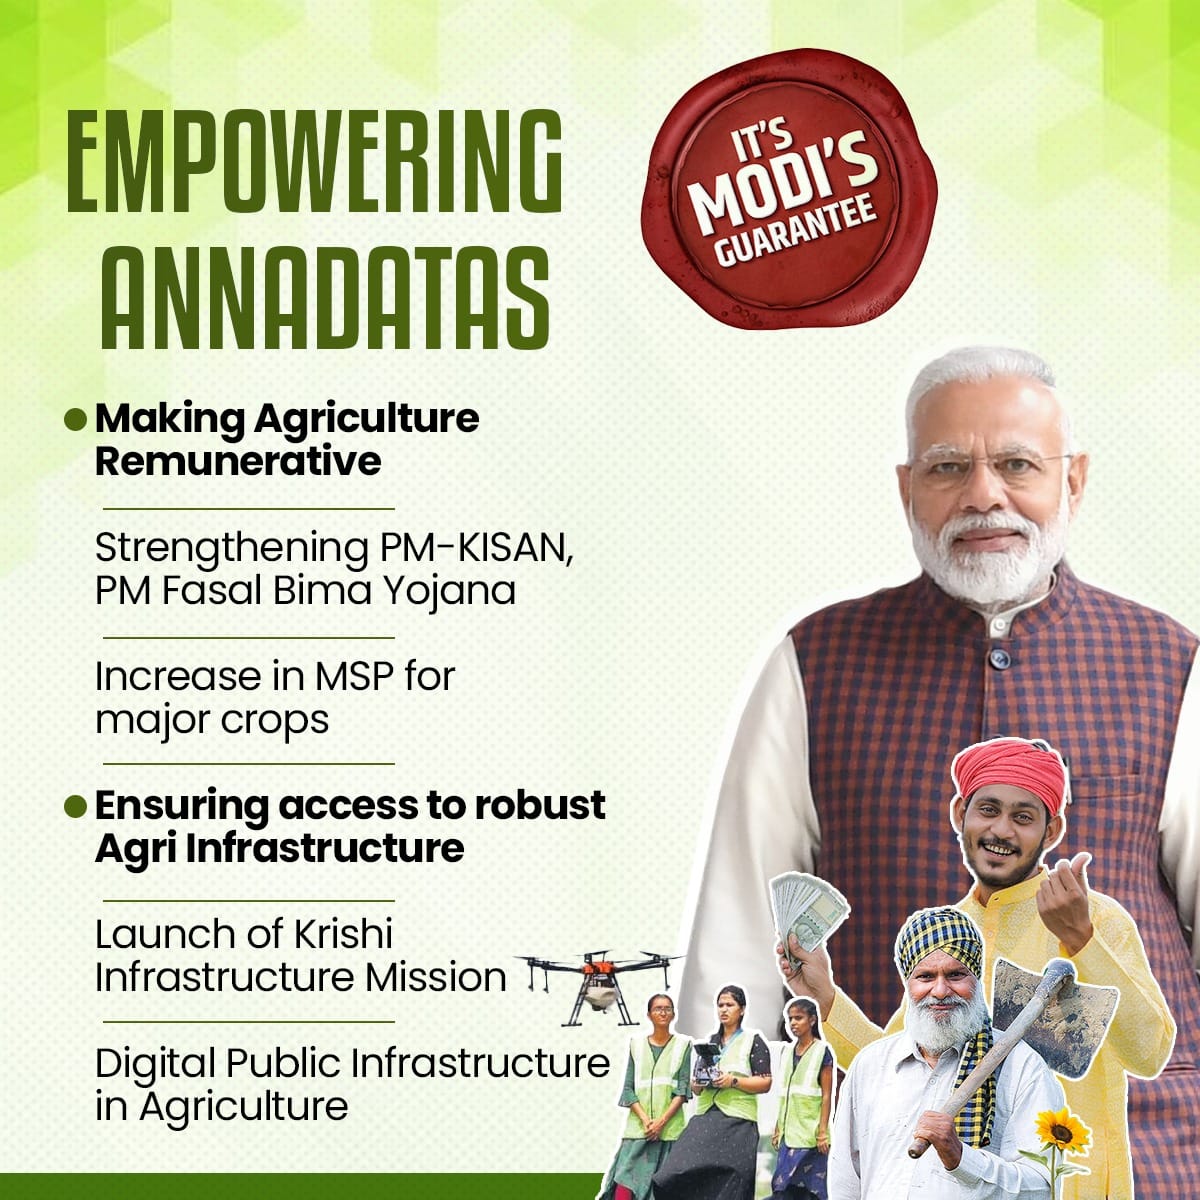 Ensuring the welfare of our Annadatas is not just a promise, it's #ModiKiGuarantee. Under Hon'ble PM Shri @narendramodi ji's leadership, numerous initiatives have been launched to empower our farmers & ensure their well-being. #PhirEkBaarModiSarkar